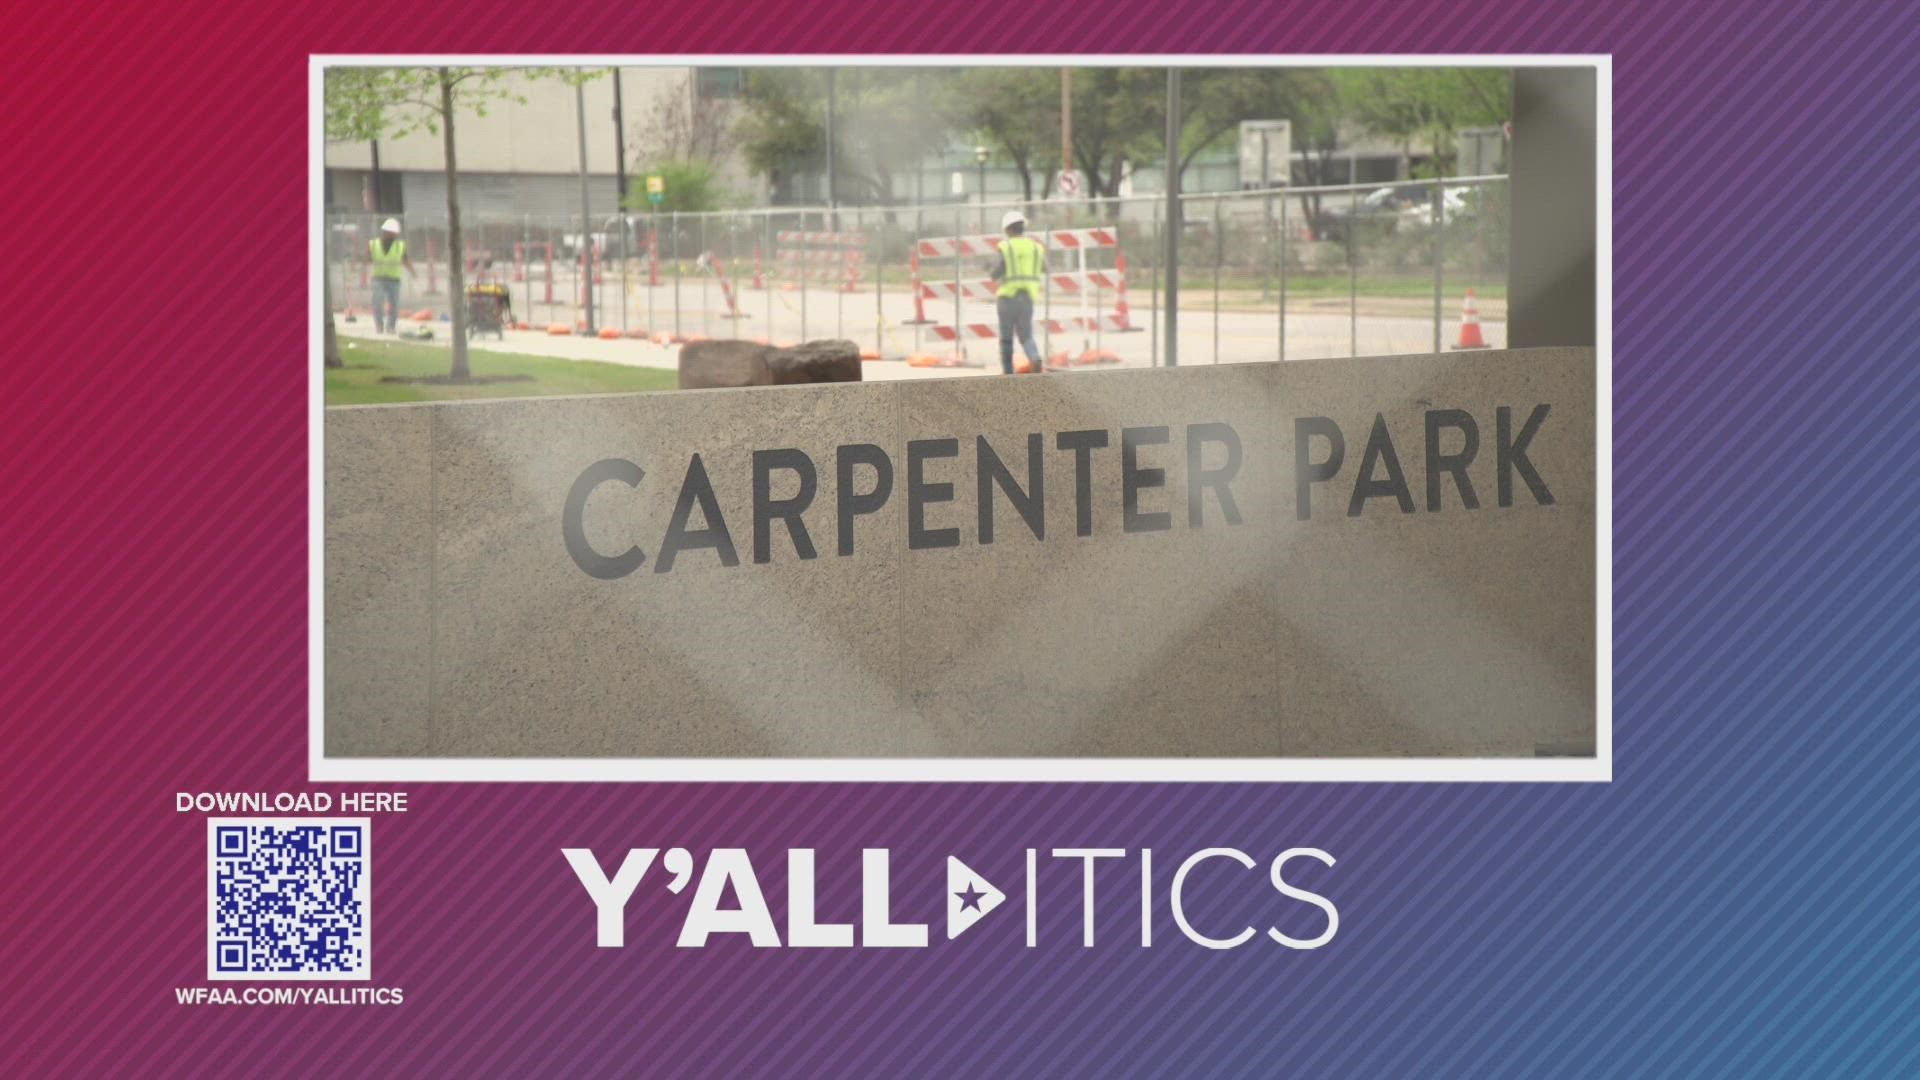 With the grand opening of Carpenter Park, Downtown Dallas’ urban renewal continues.